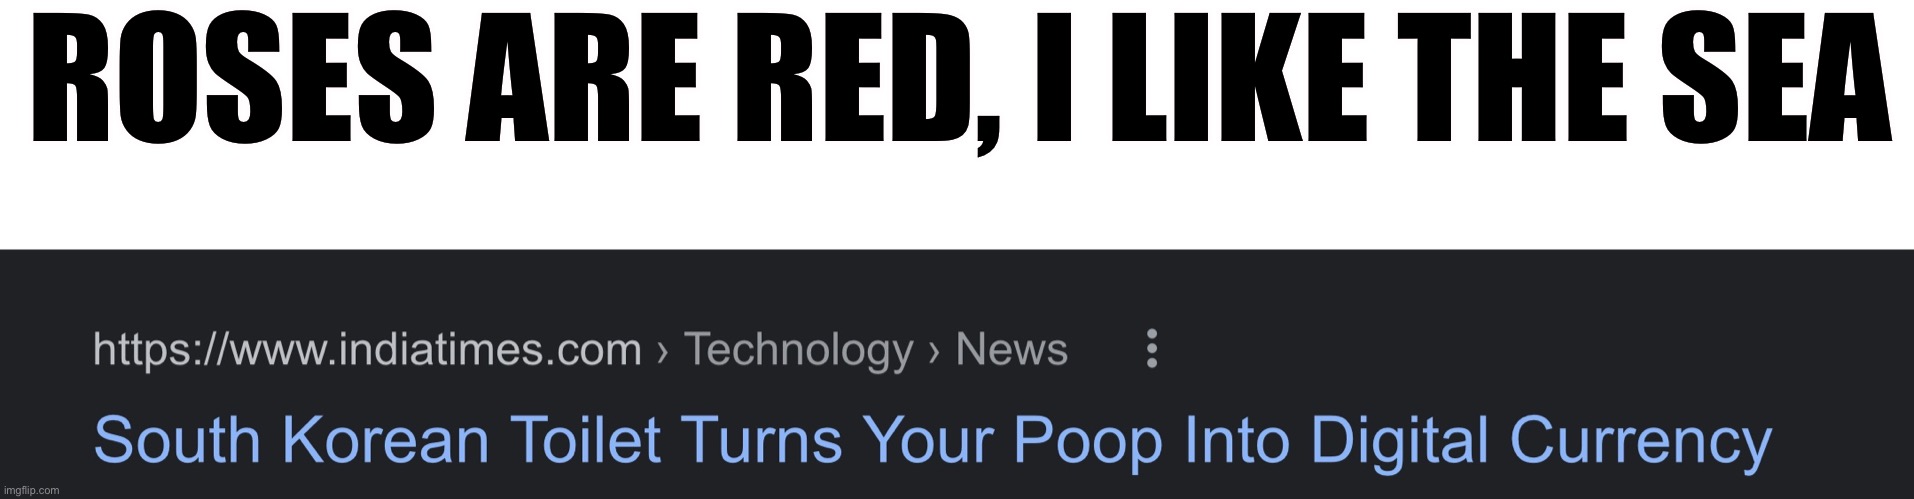 Yeet |  ROSES ARE RED, I LIKE THE SEA | image tagged in funny,poop,sfw,gif,yeet,south korea | made w/ Imgflip meme maker